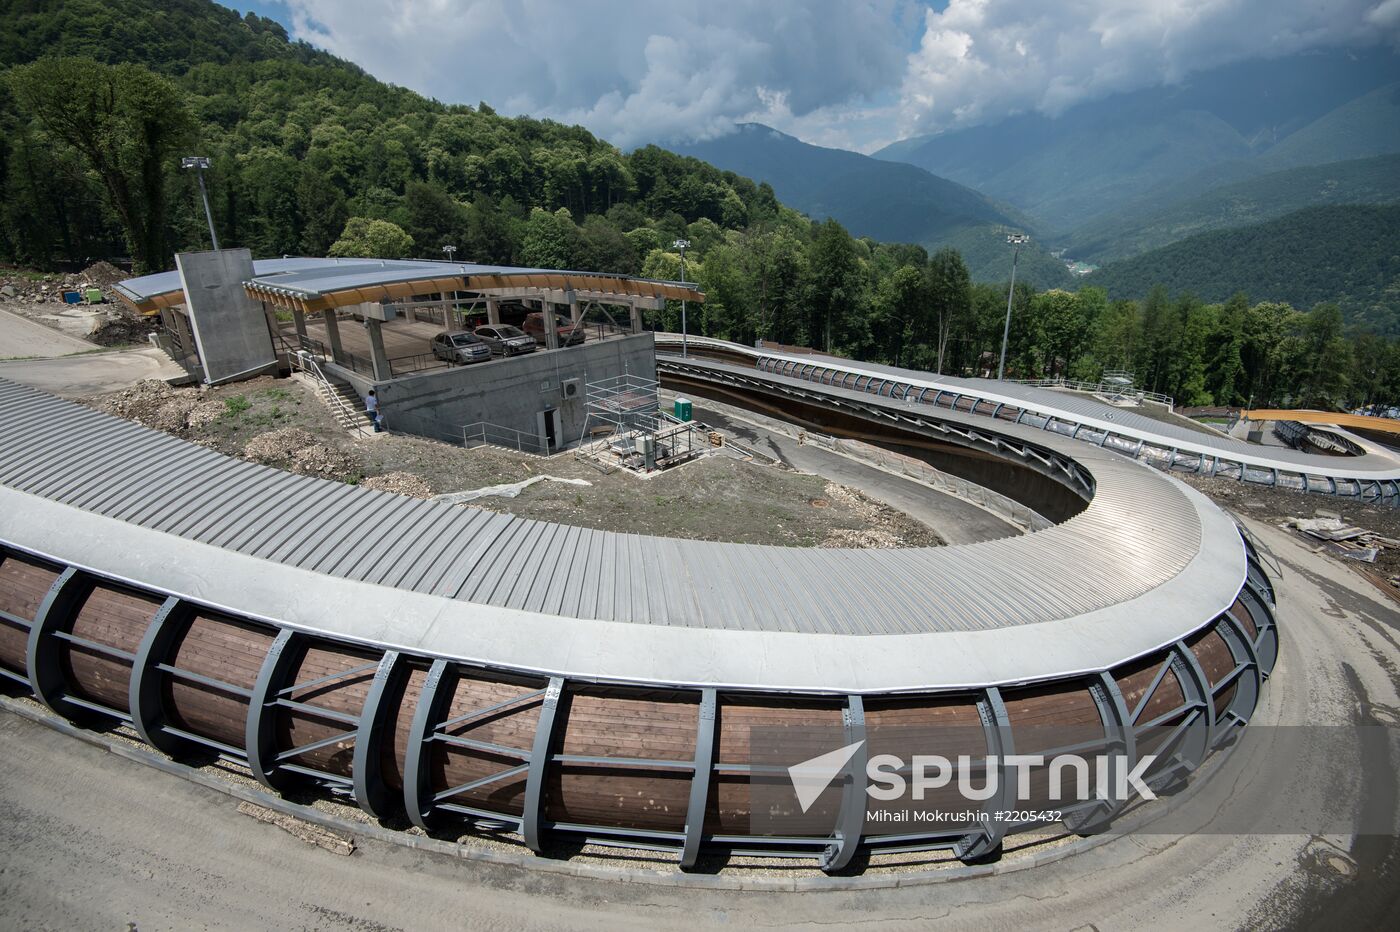 Construction of Olympic facilities